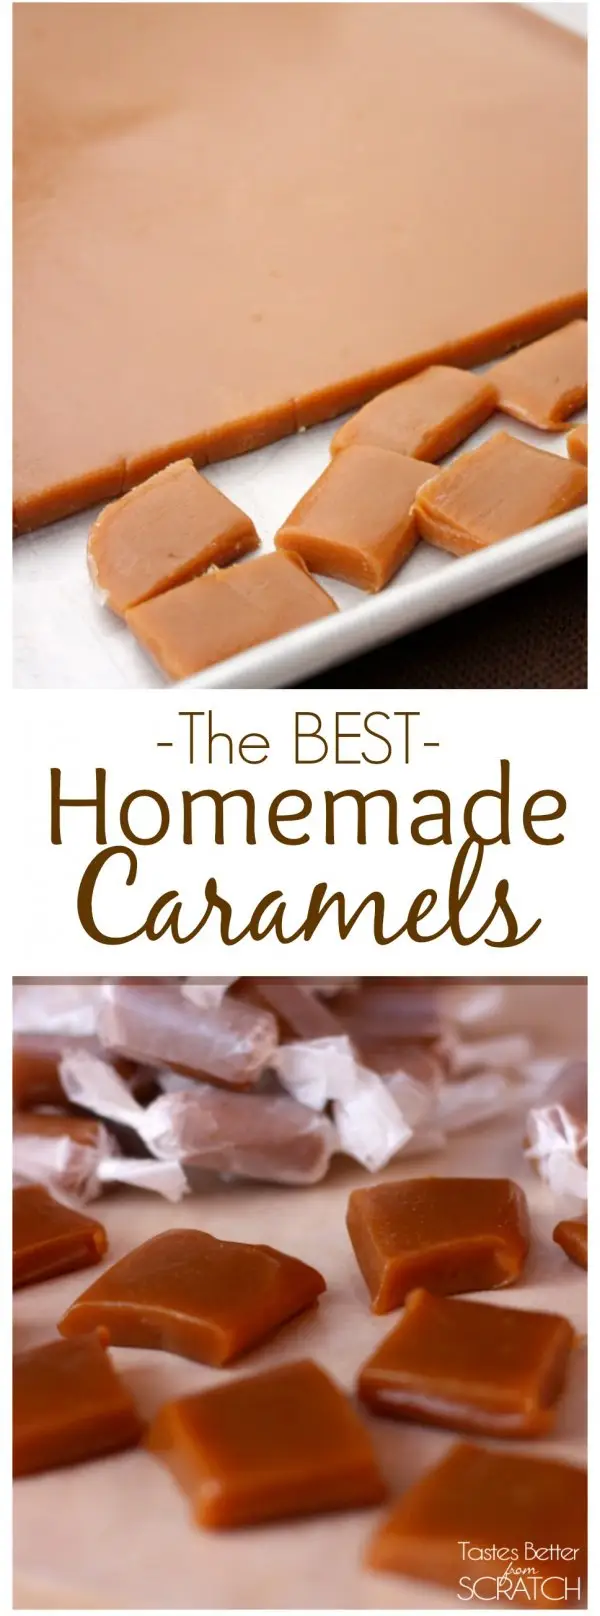 Never Buy Candy Again Here Are 37 Diy Versions You Can Make at Home ...